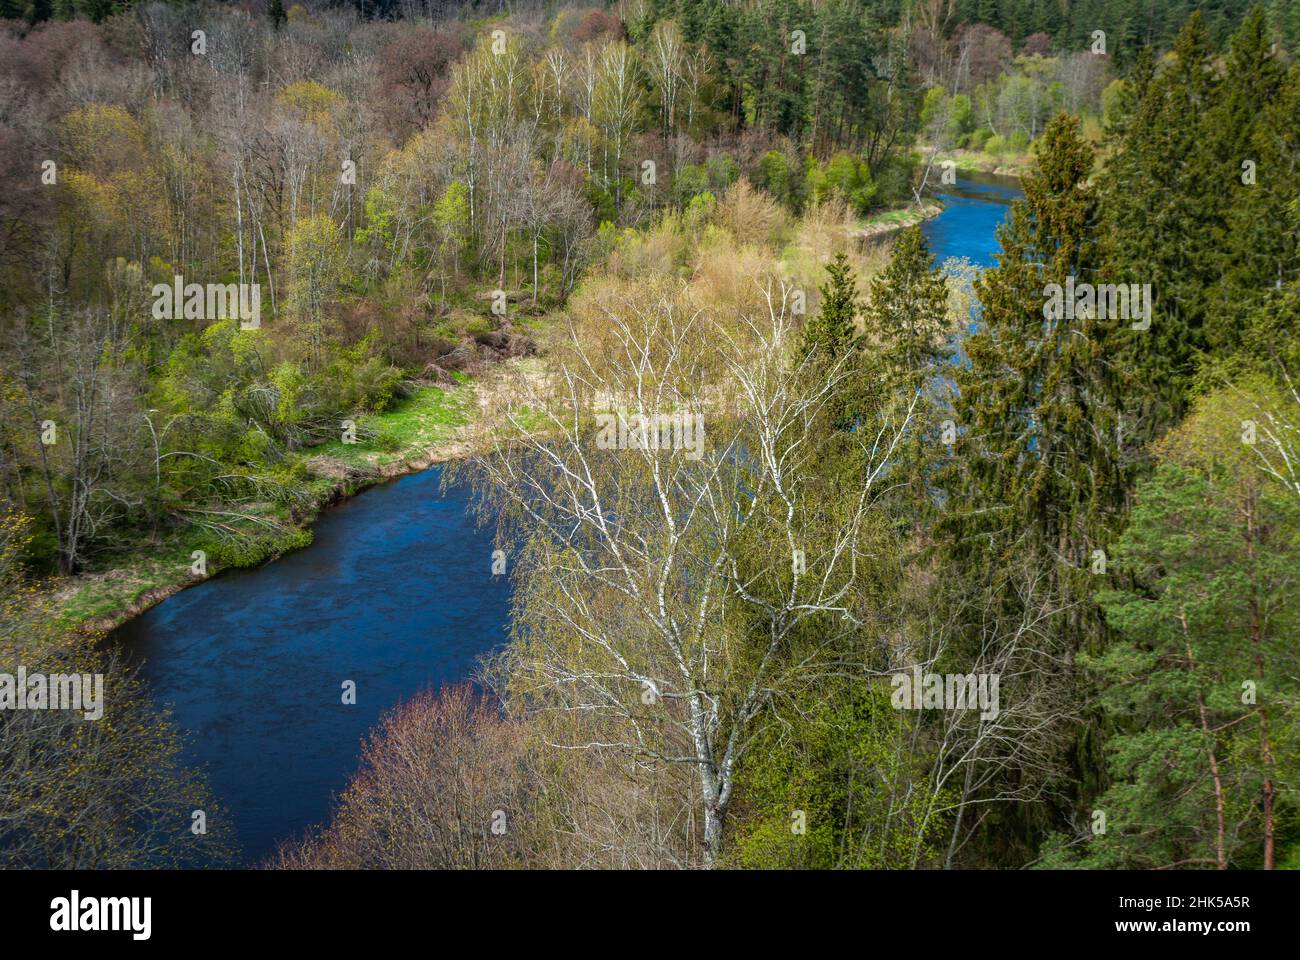 Upper view of the river flowing through the forest. Stock Photo